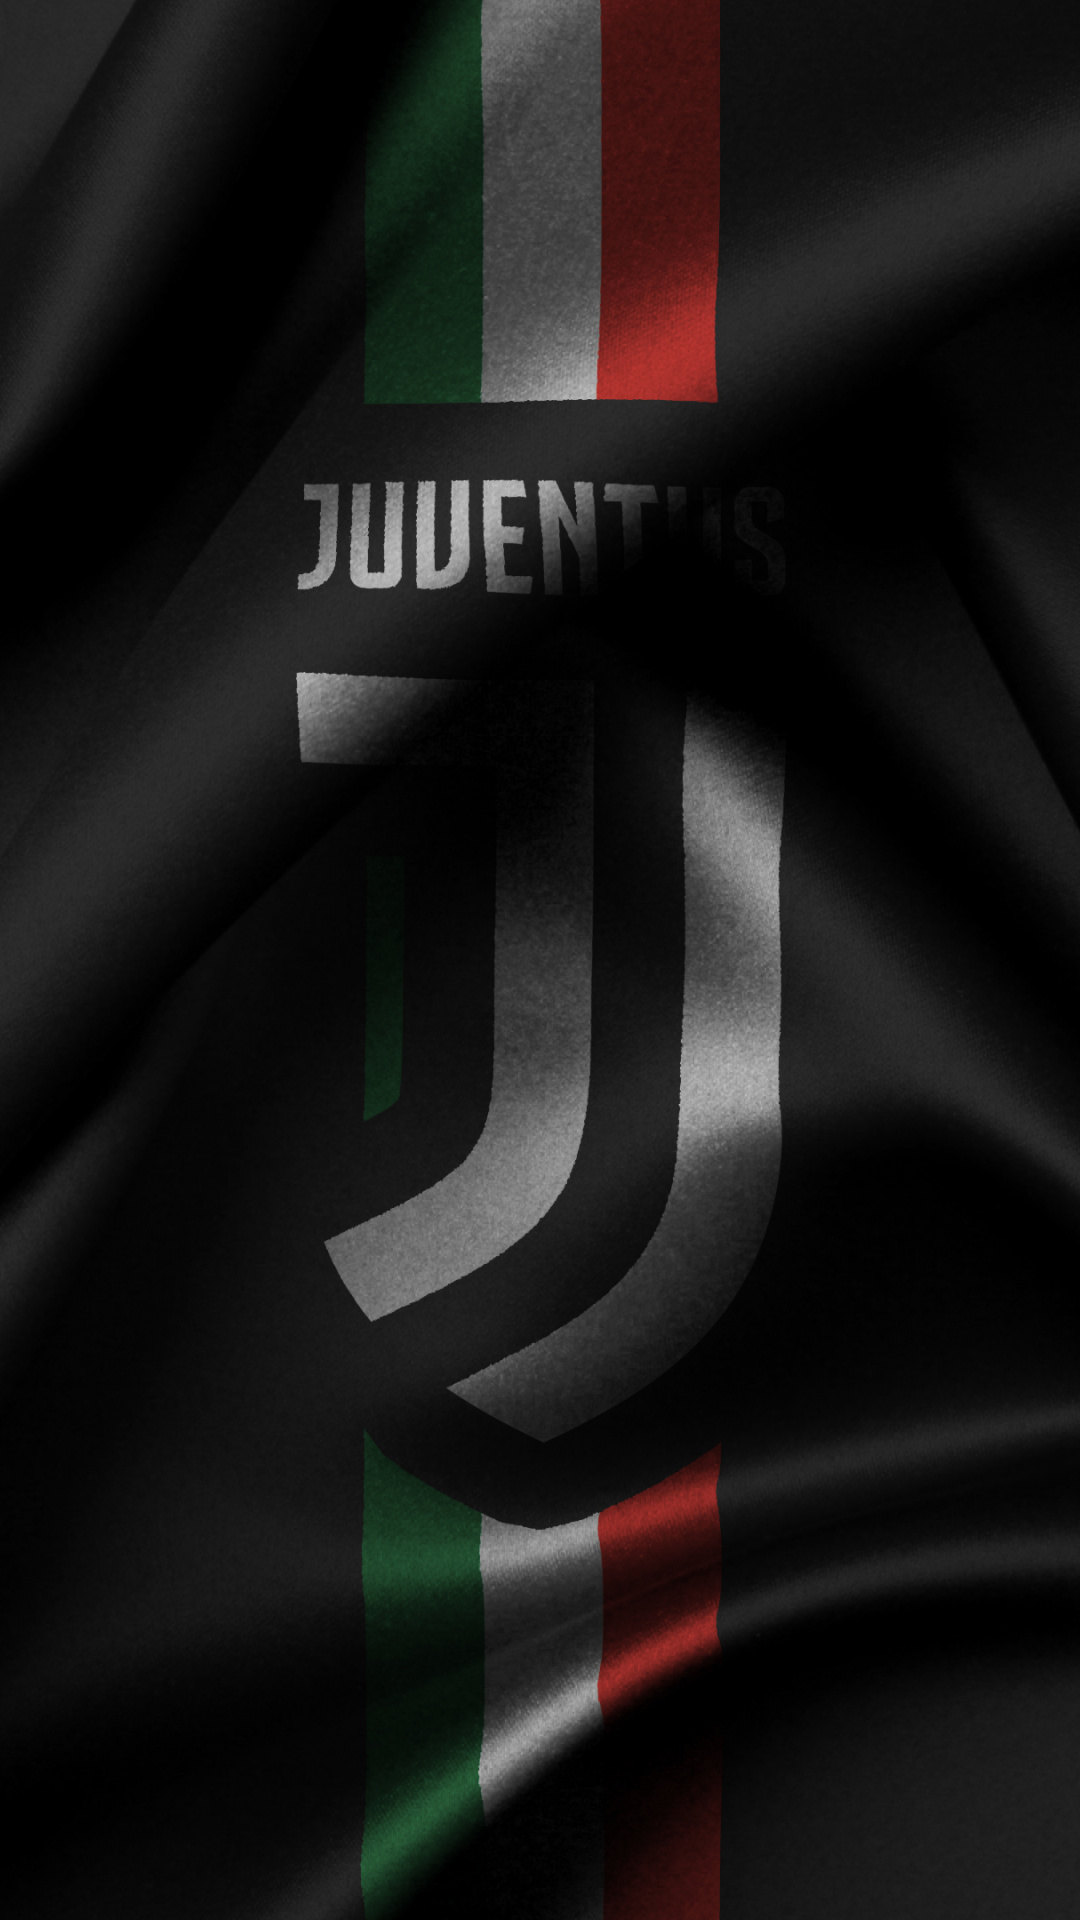 Juventus: Managed by the industrial Agnelli family almost continuously since 1923. 1080x1920 Full HD Background.